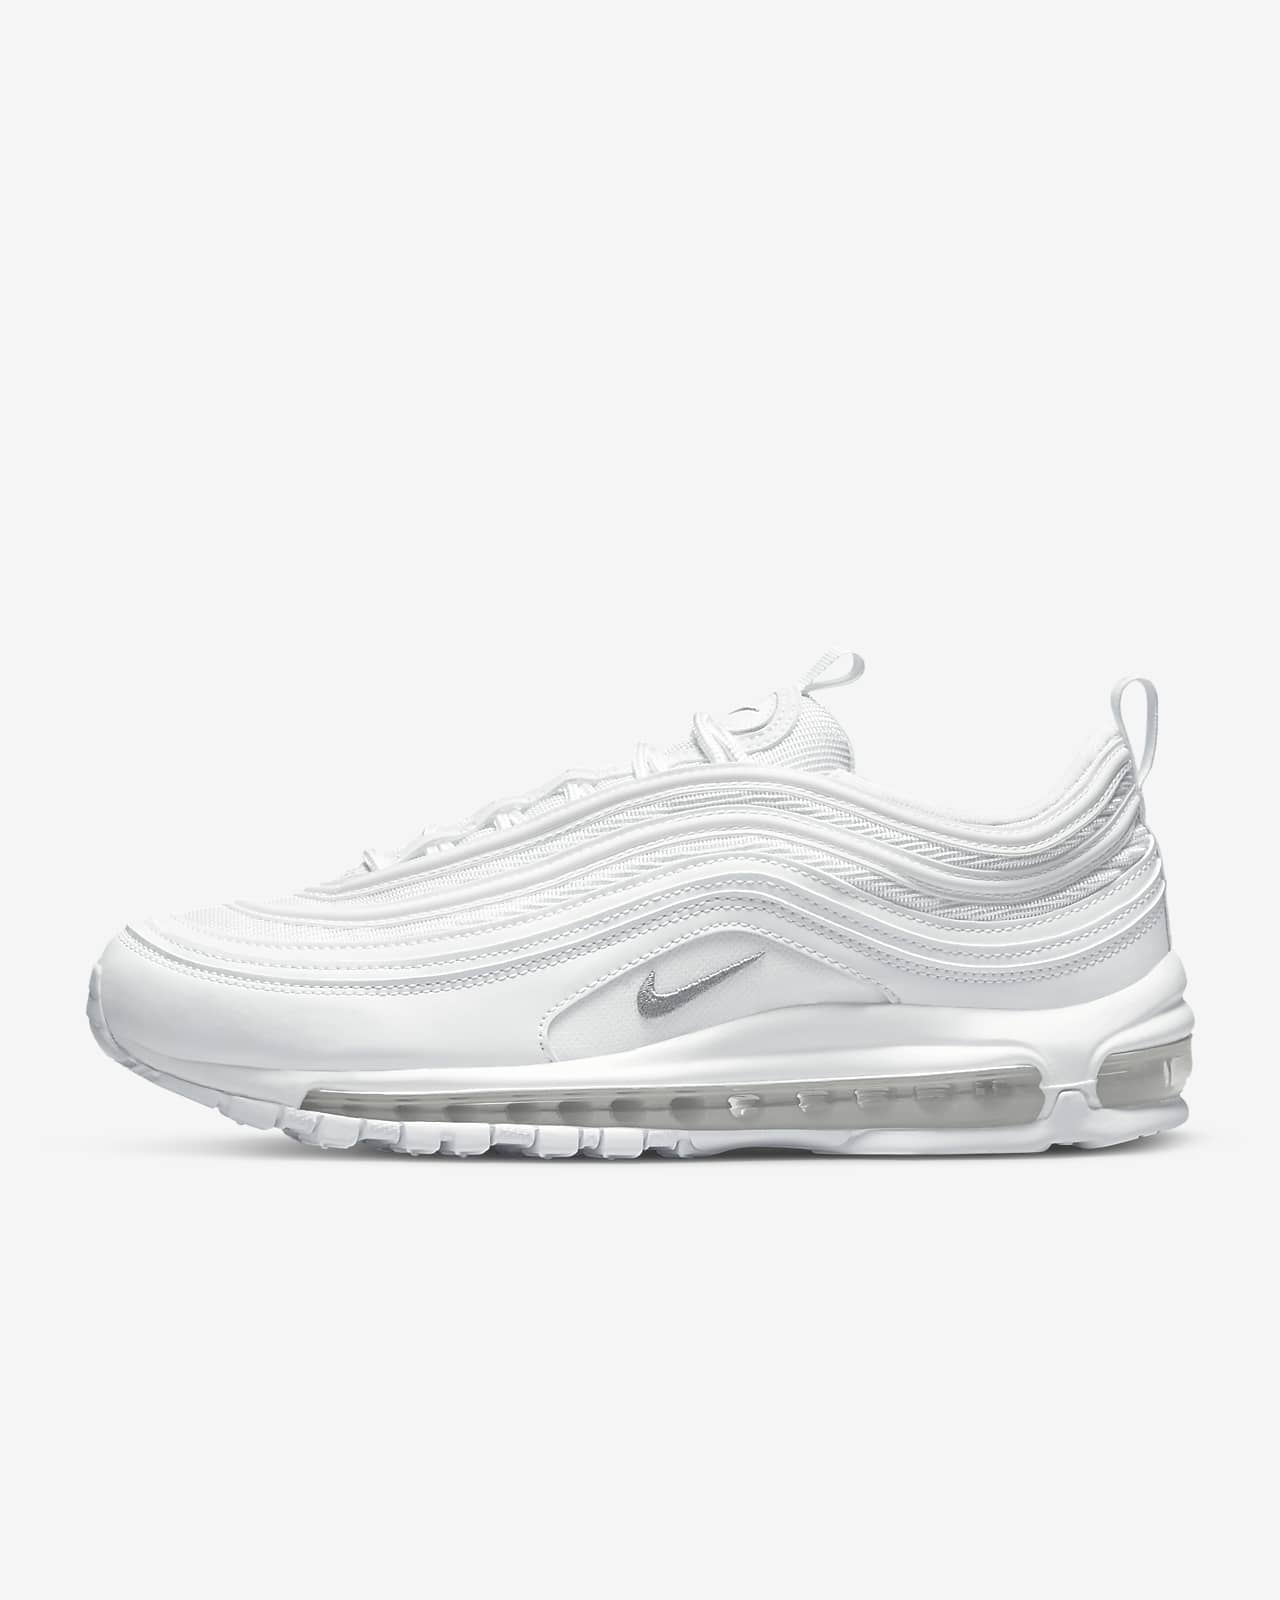 Parity > nike air max 97 blanc, Up to 72% OFF